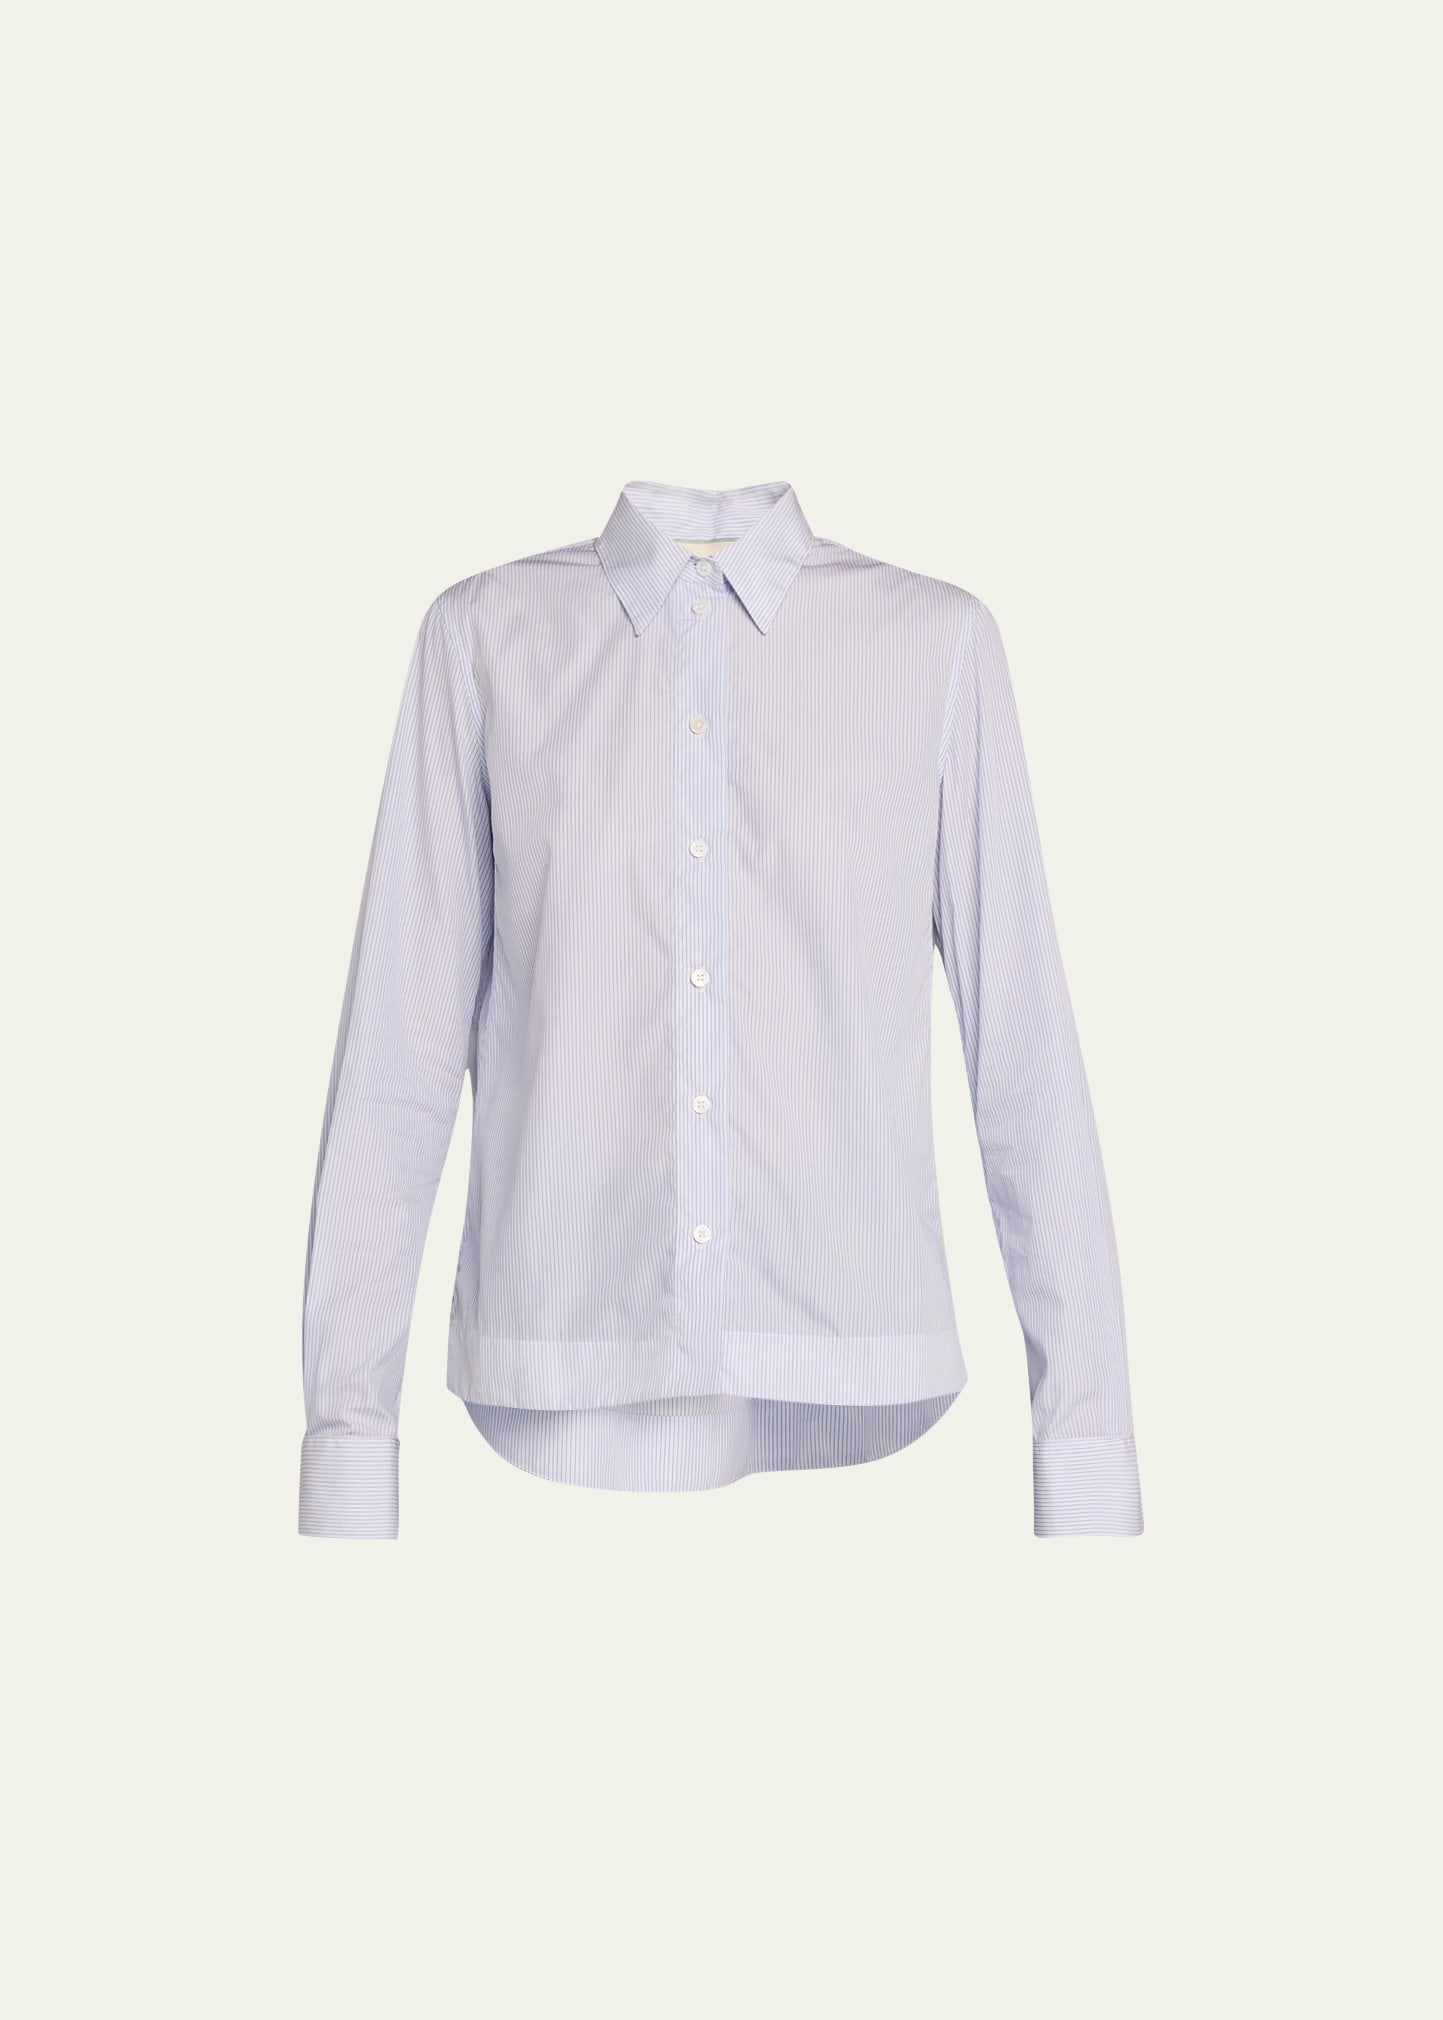 We-ar4 Cropped Collared Shirt In Light Blue Stripe